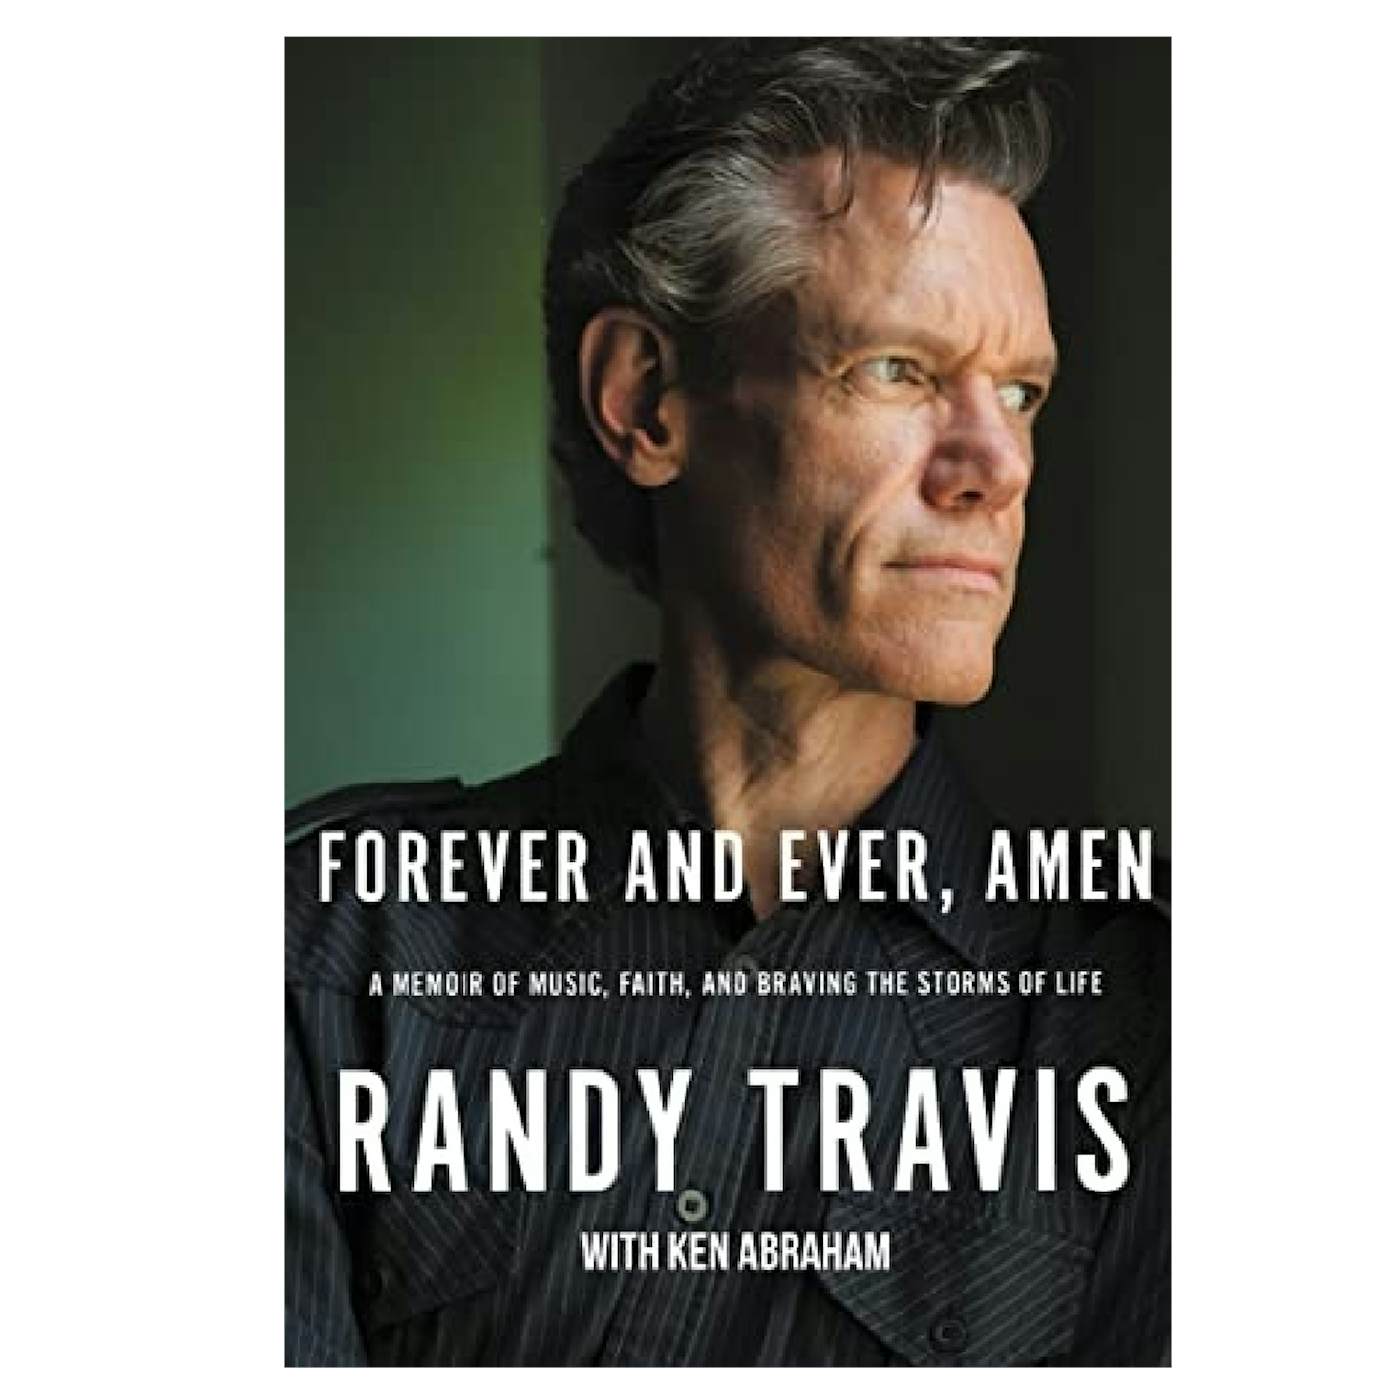 Randy Travis Forever and Ever, Amen: A Memoir of Music, Faith, and Braving the Storms of Life